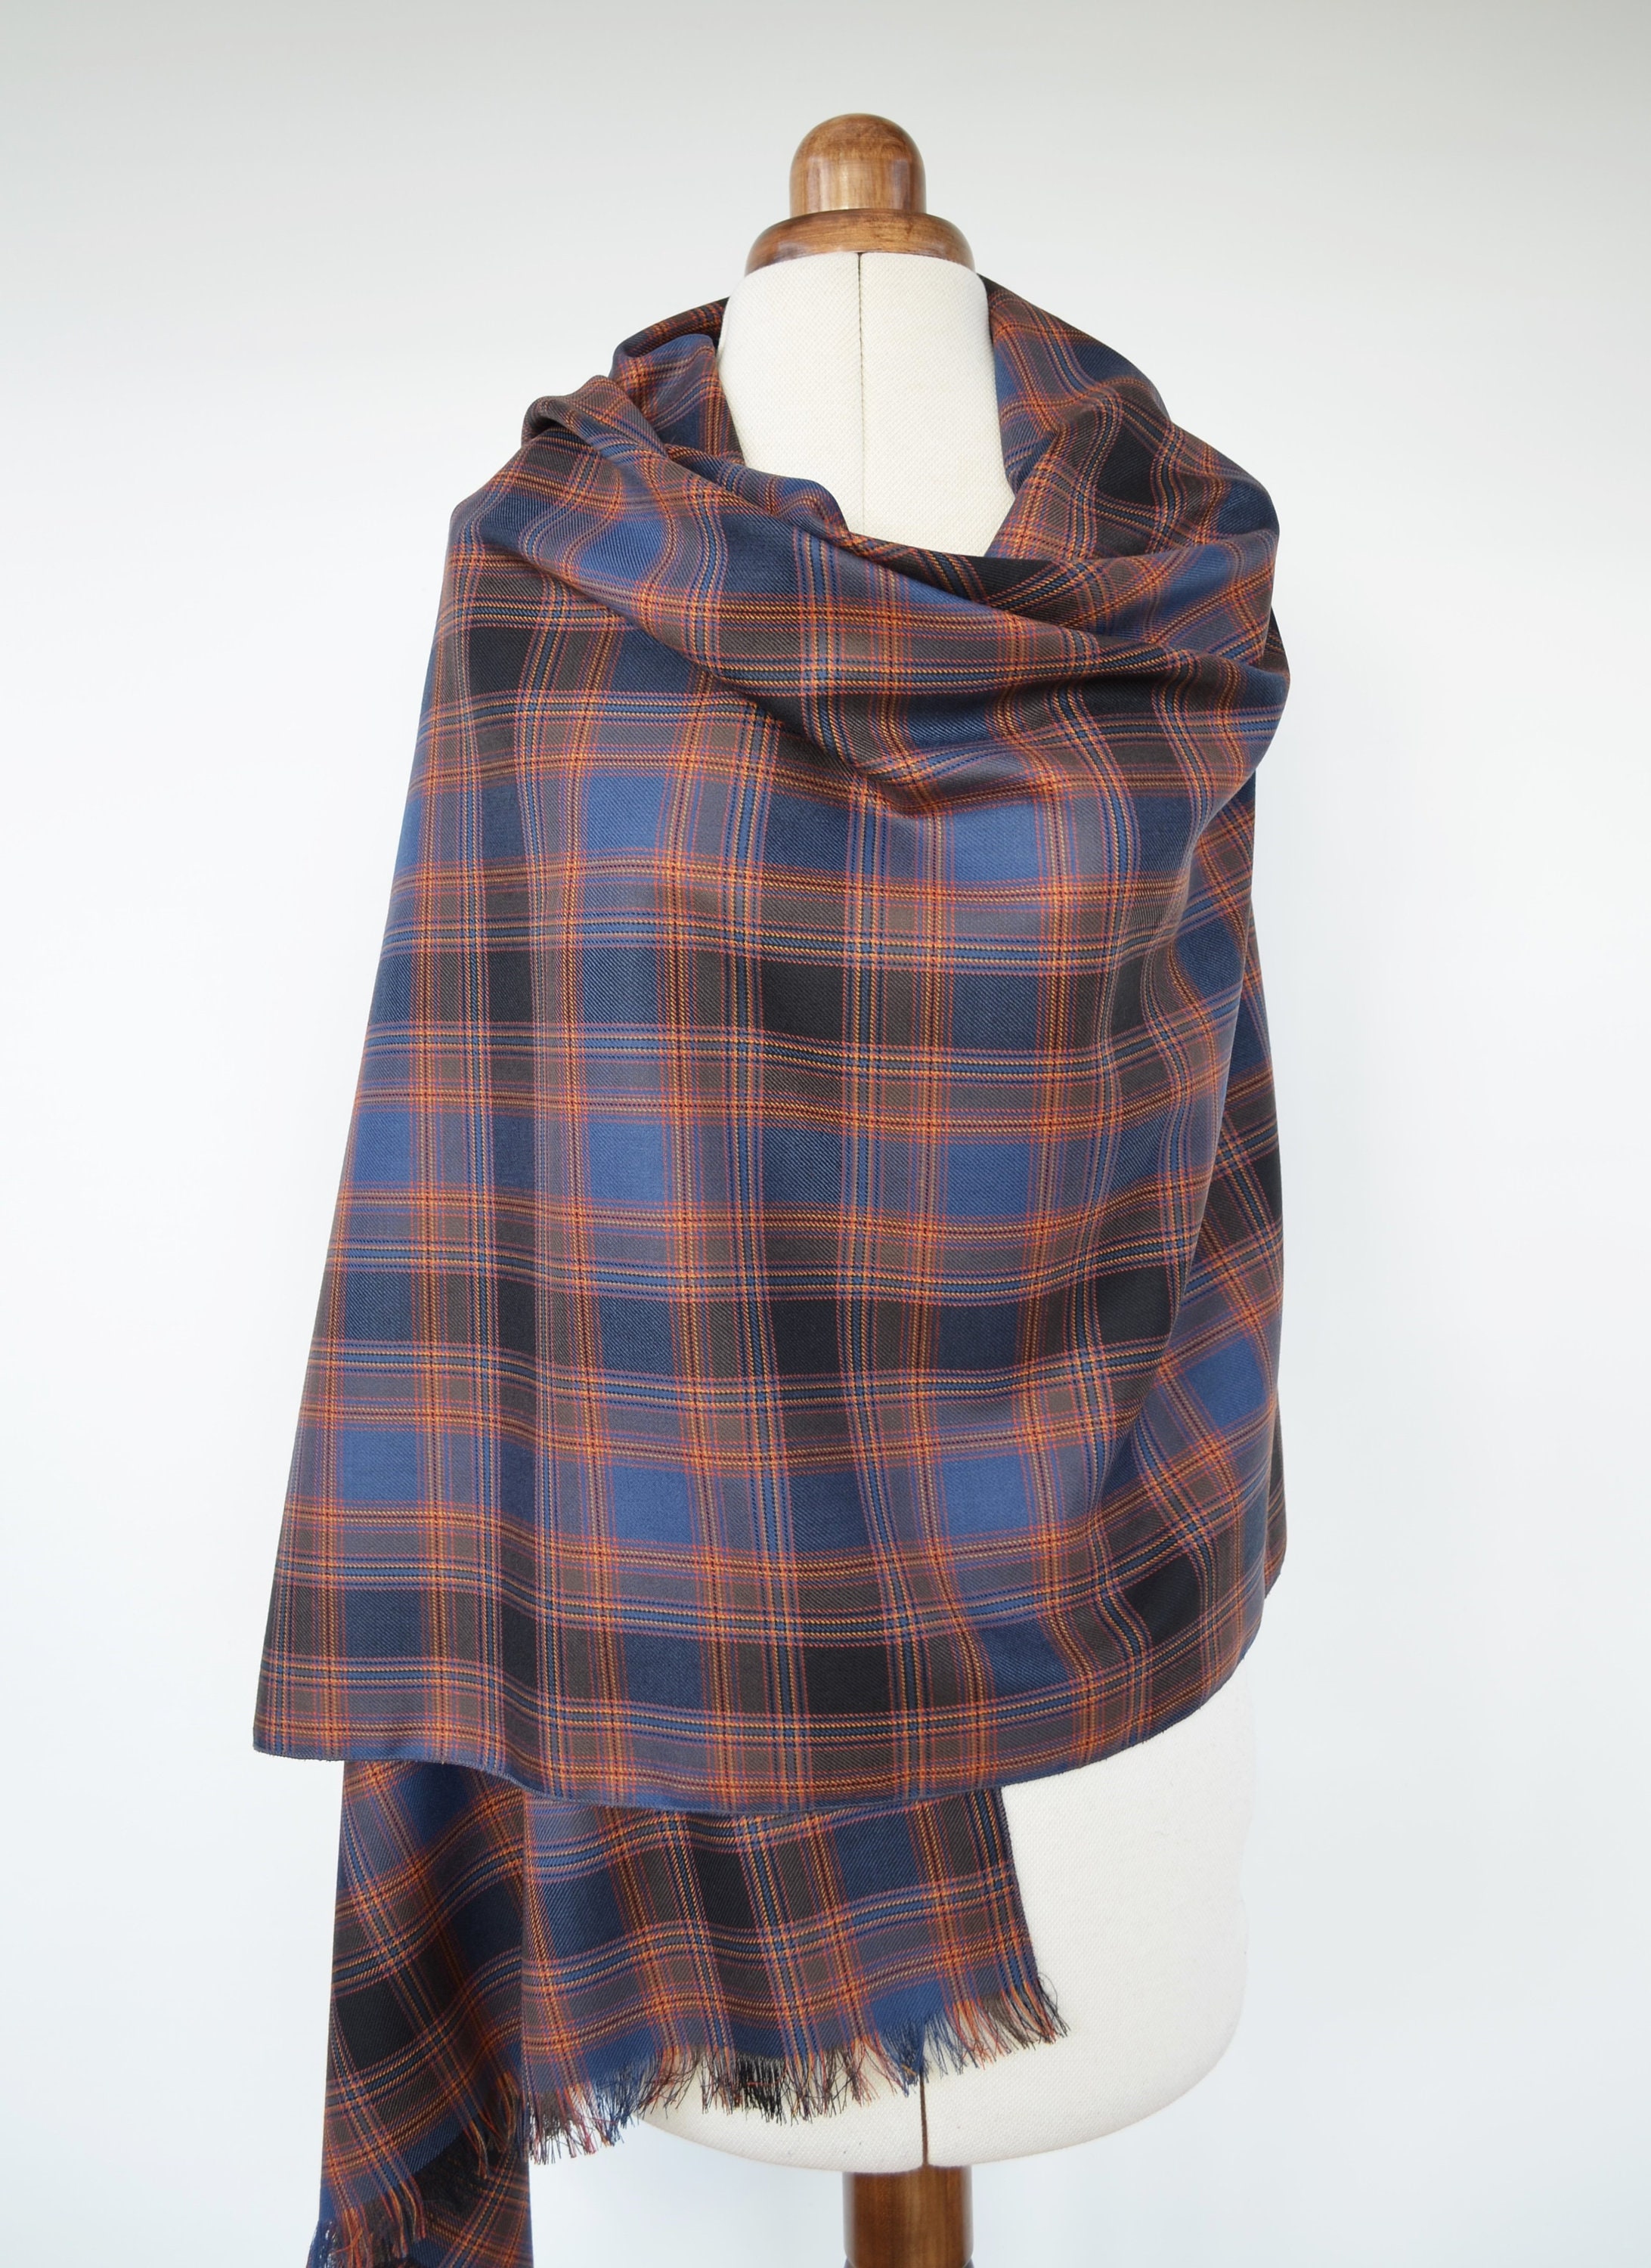 rectangular tartan in pink gray and black wool blend for men or women Large CHALE SCARF